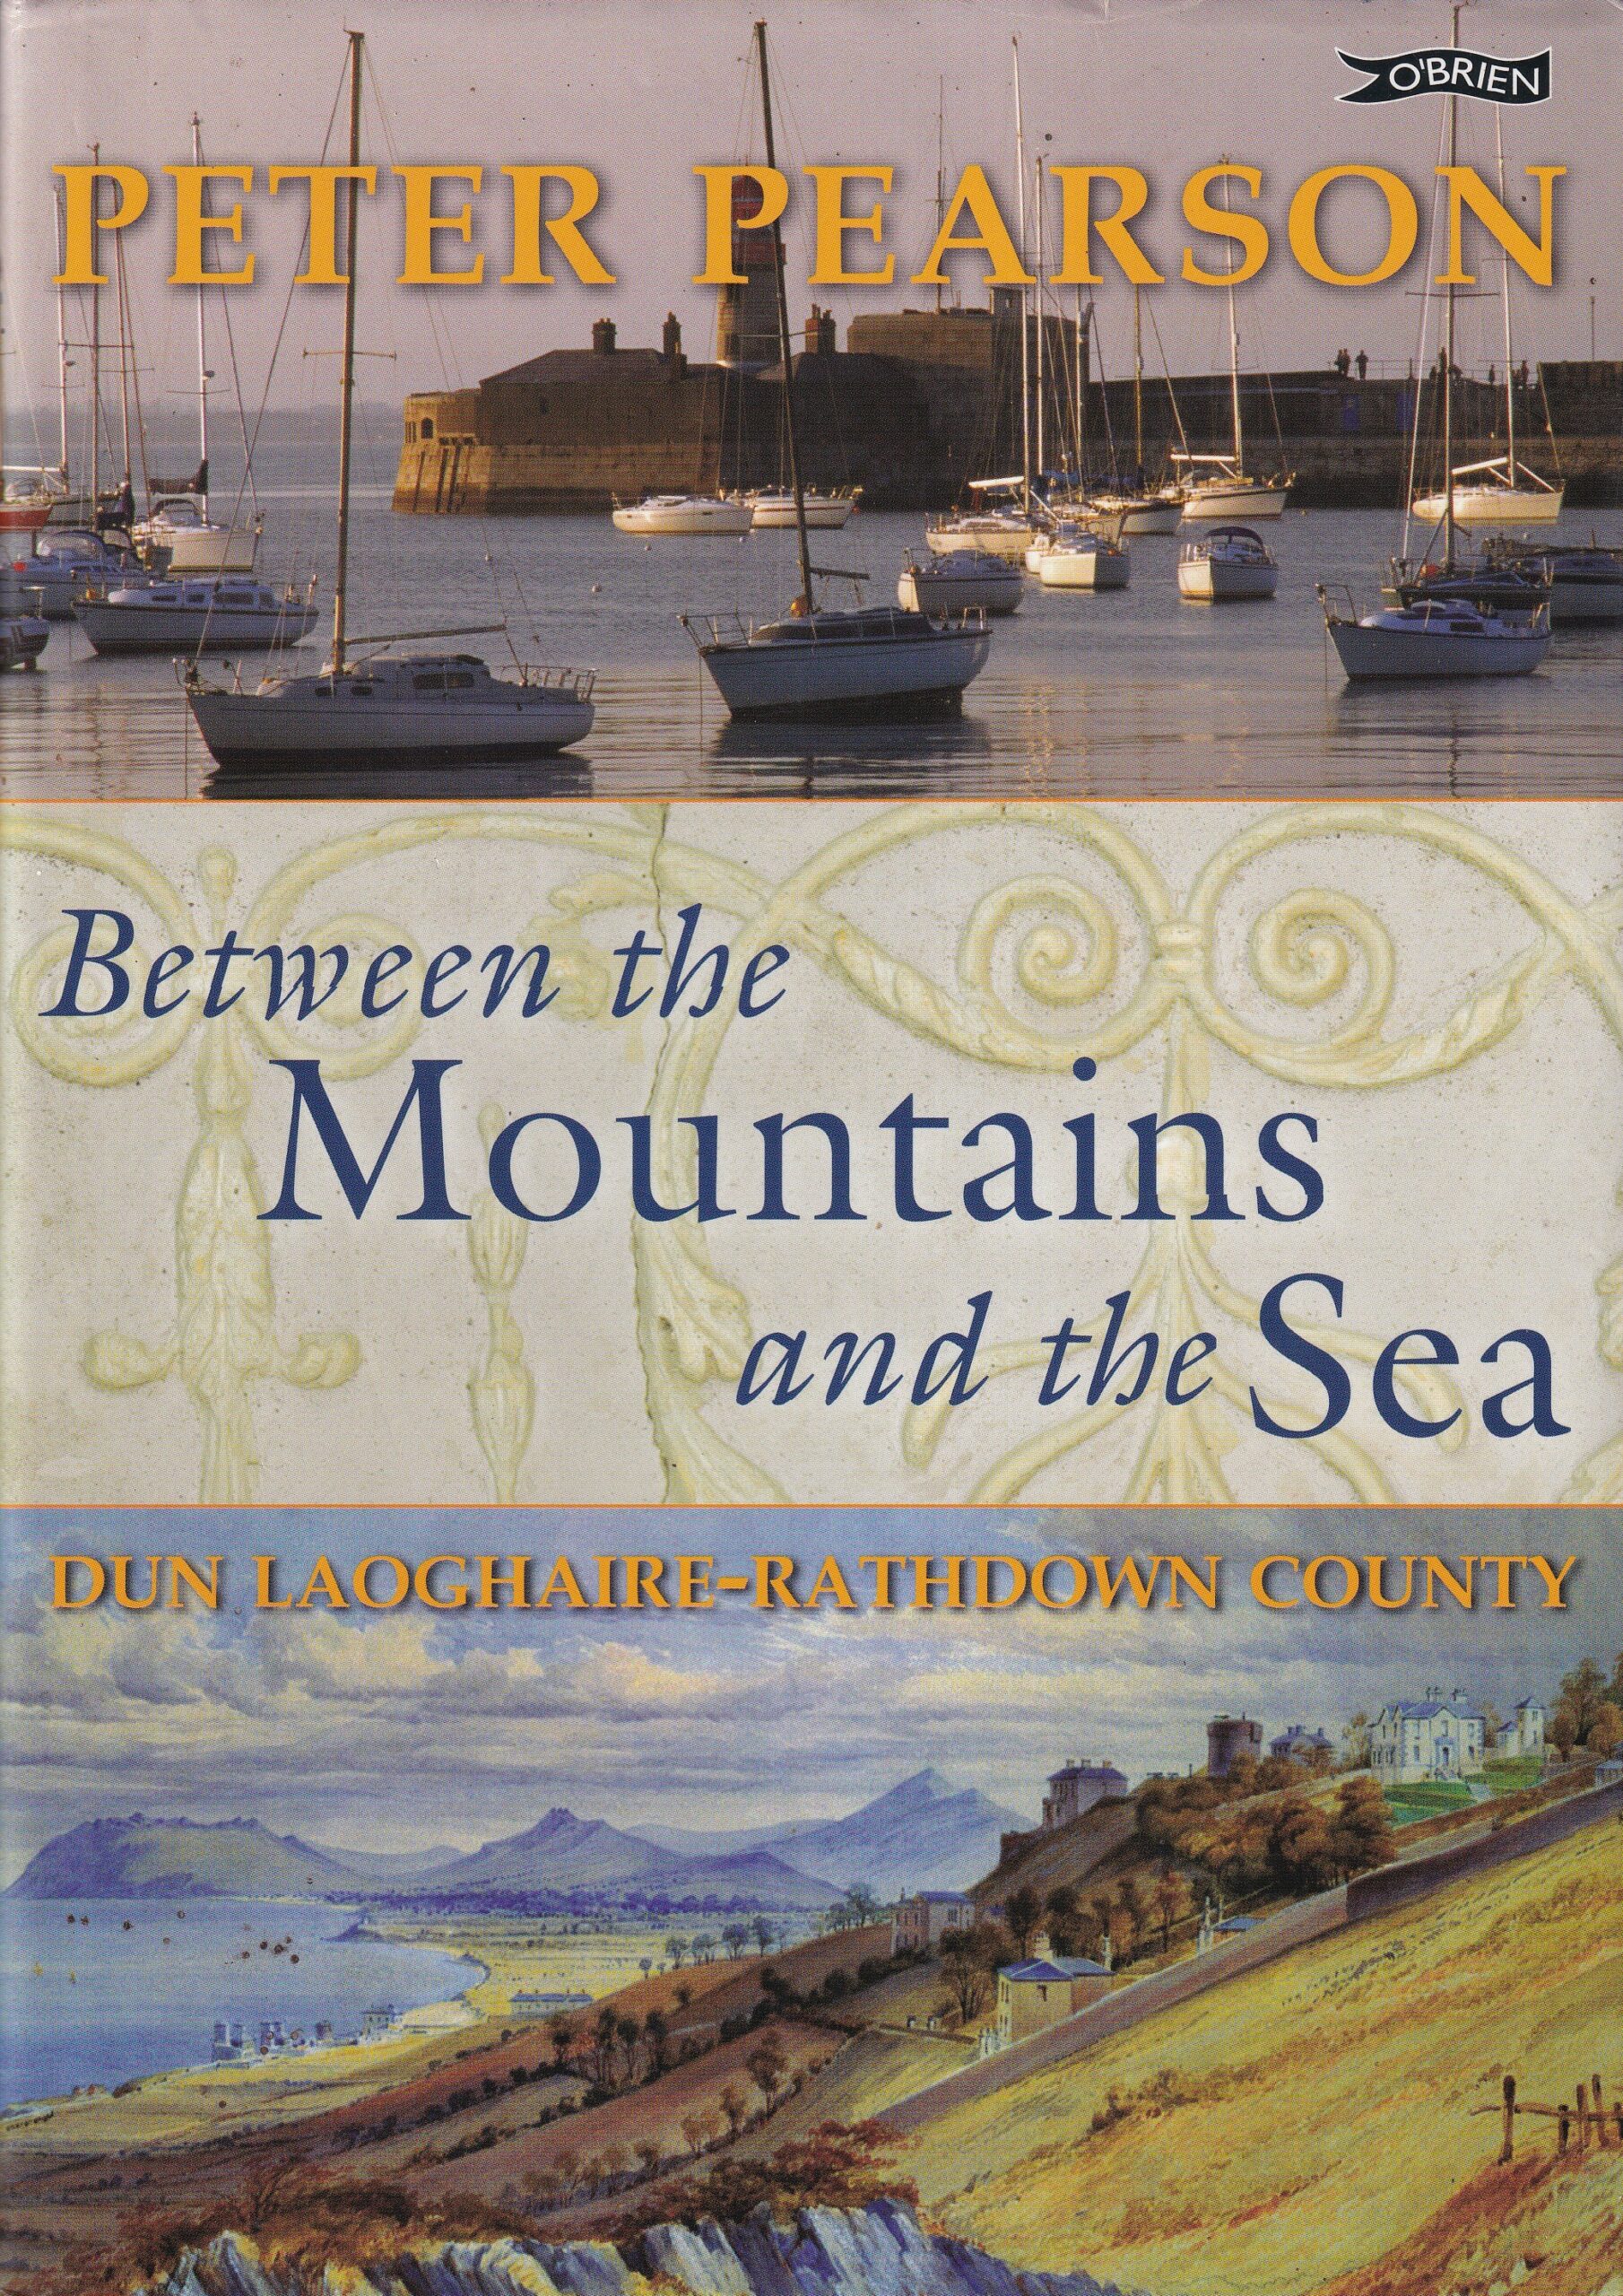 Between the Mountains and the Sea: Dun Laoghaire-Rathdown County | Peter Pearson | Charlie Byrne's